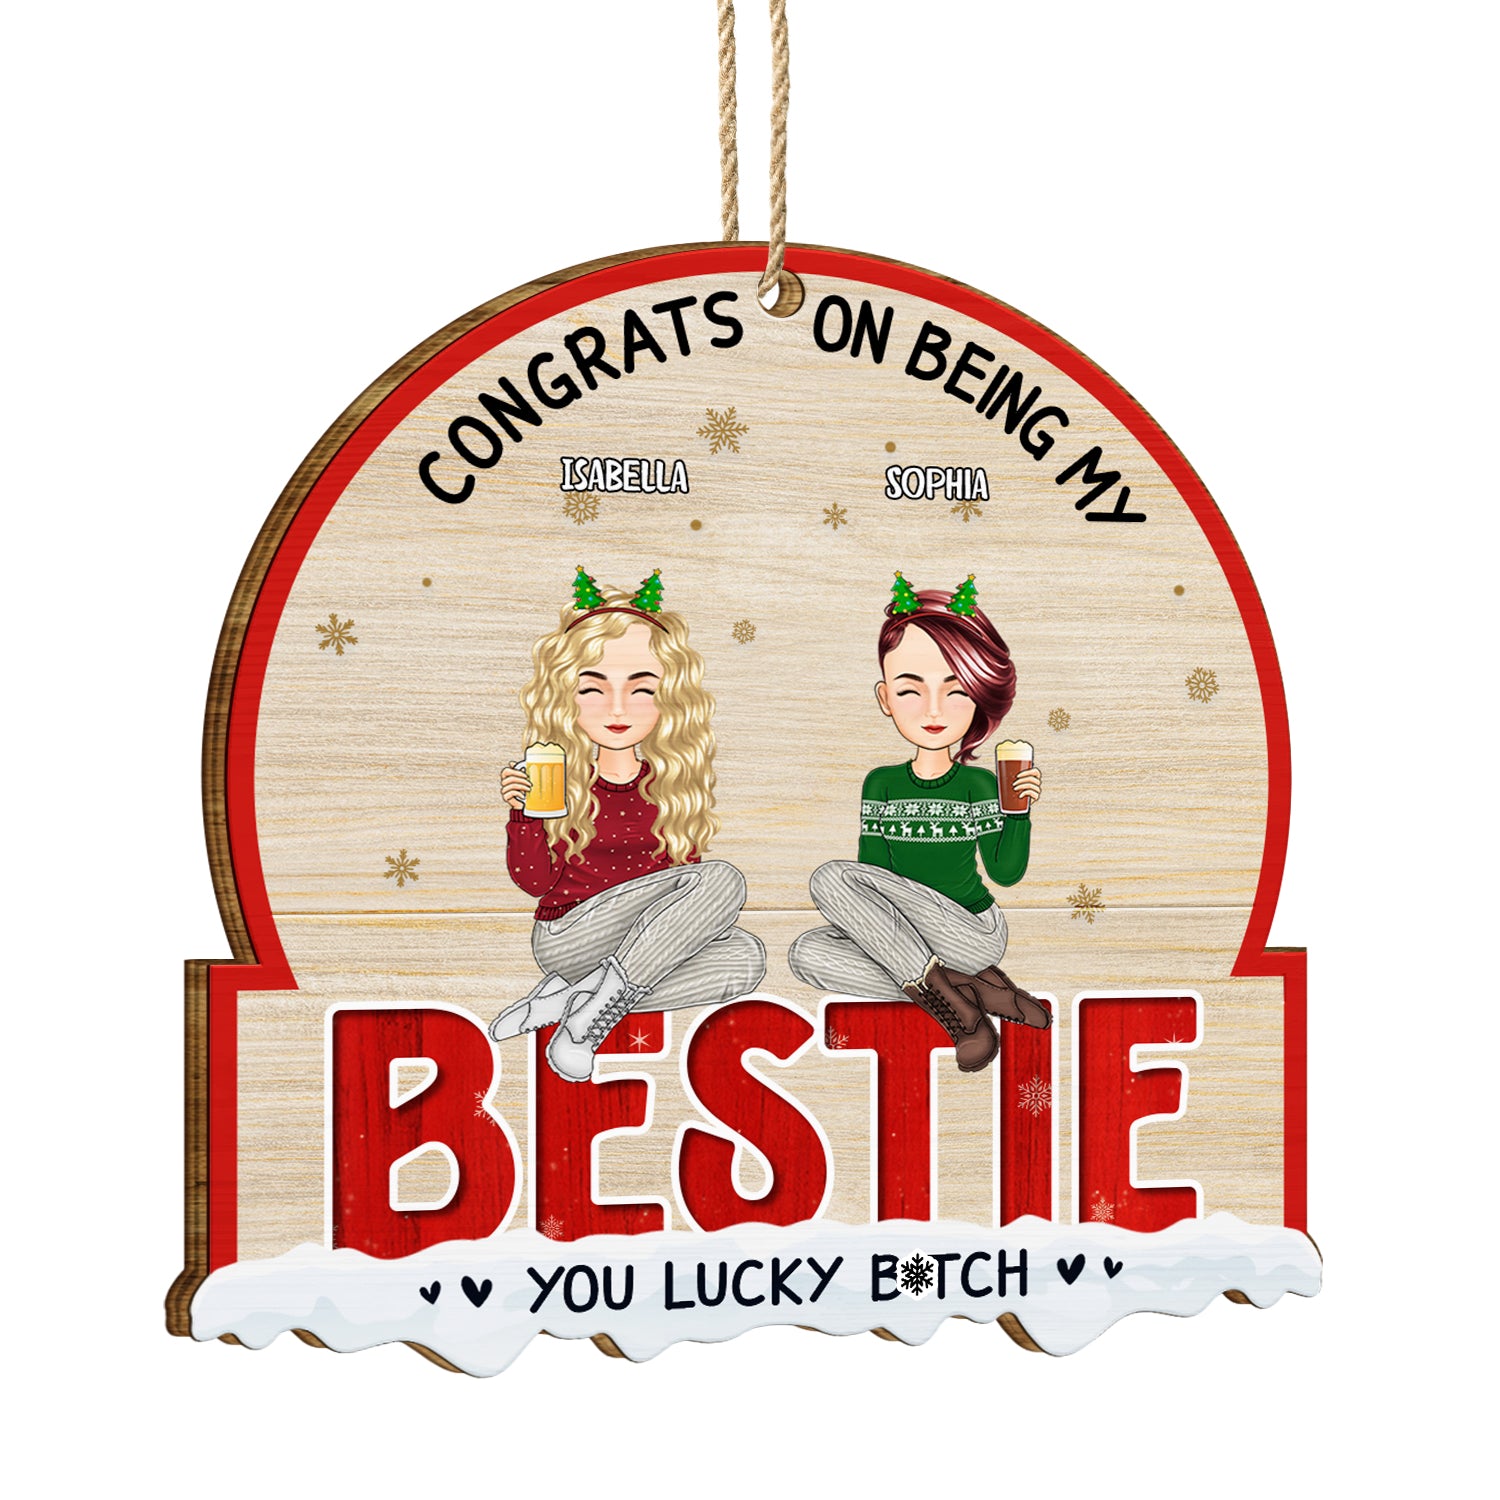 Christmas Congrats On Being My Besties - Gift For Bestie - Personalized Custom Shaped Wooden Ornament